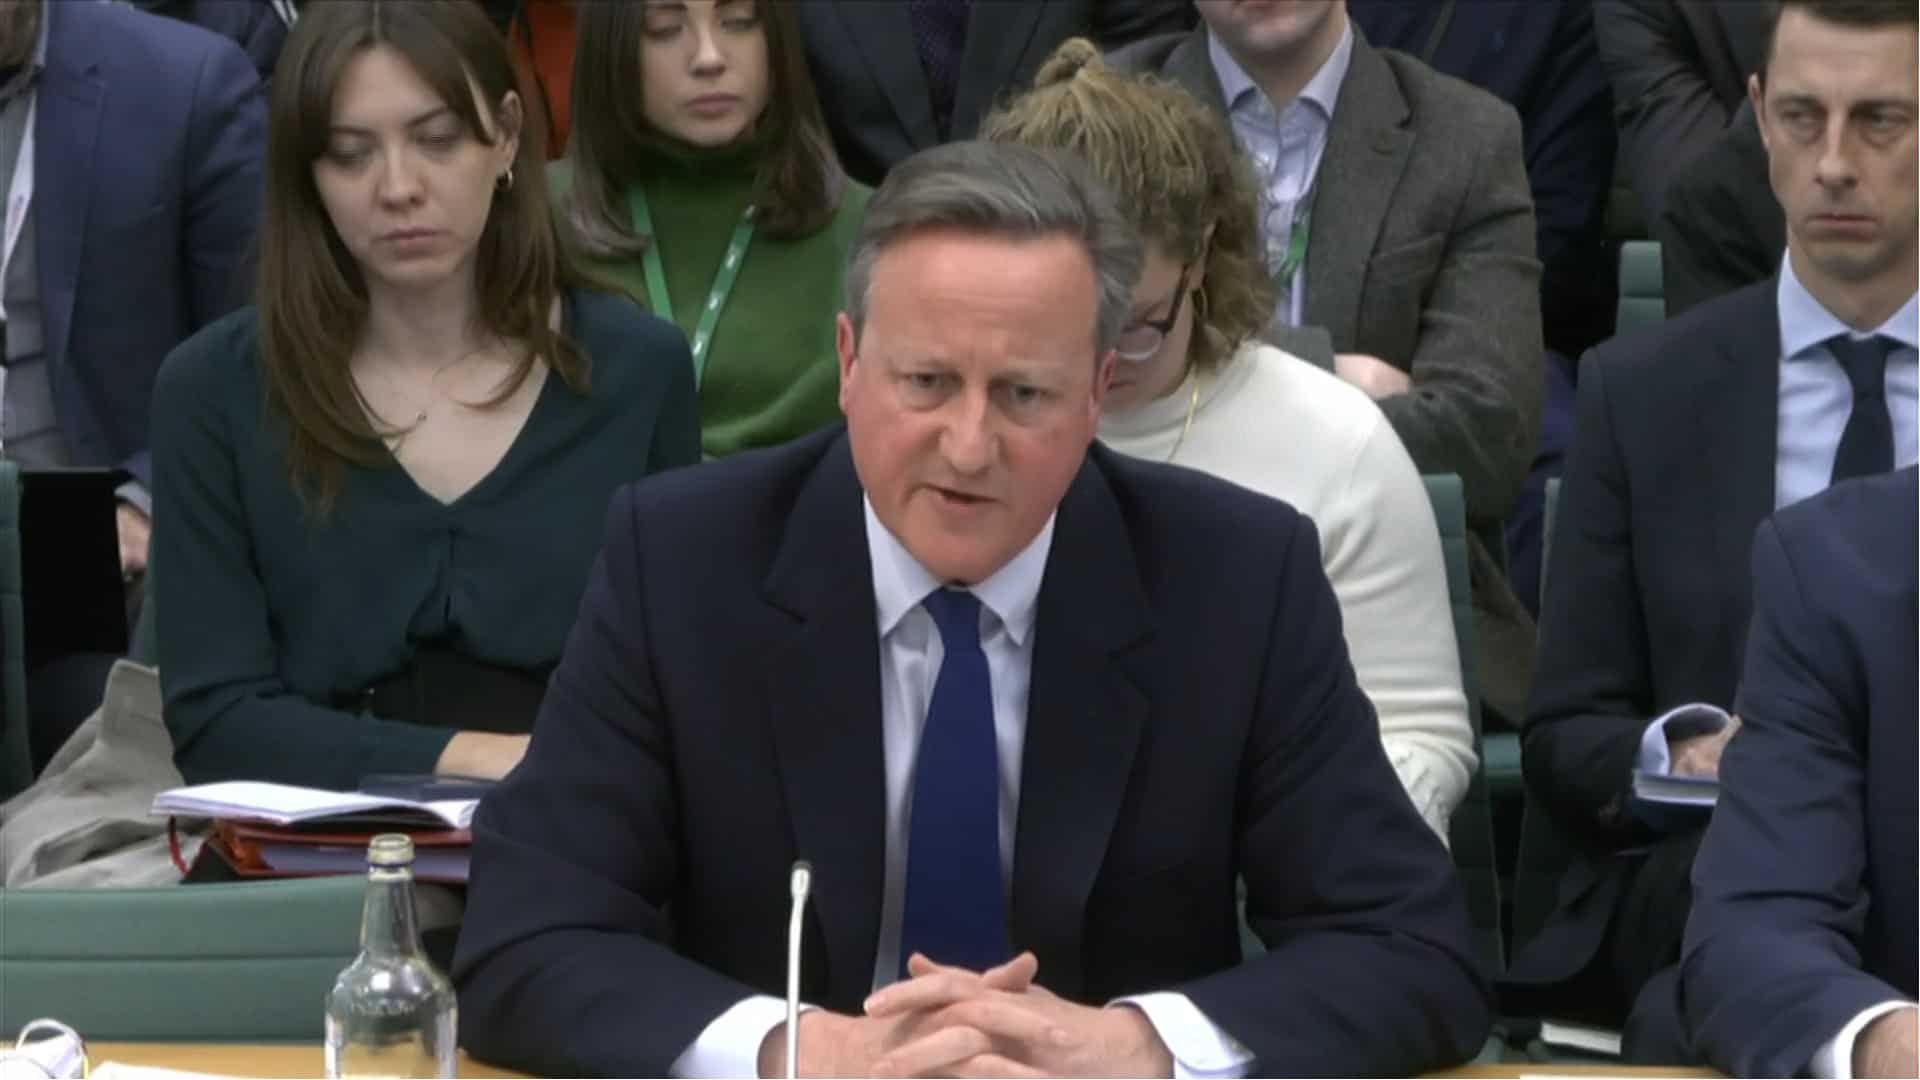 Cameron ‘worried’ Israel may have acted against international law